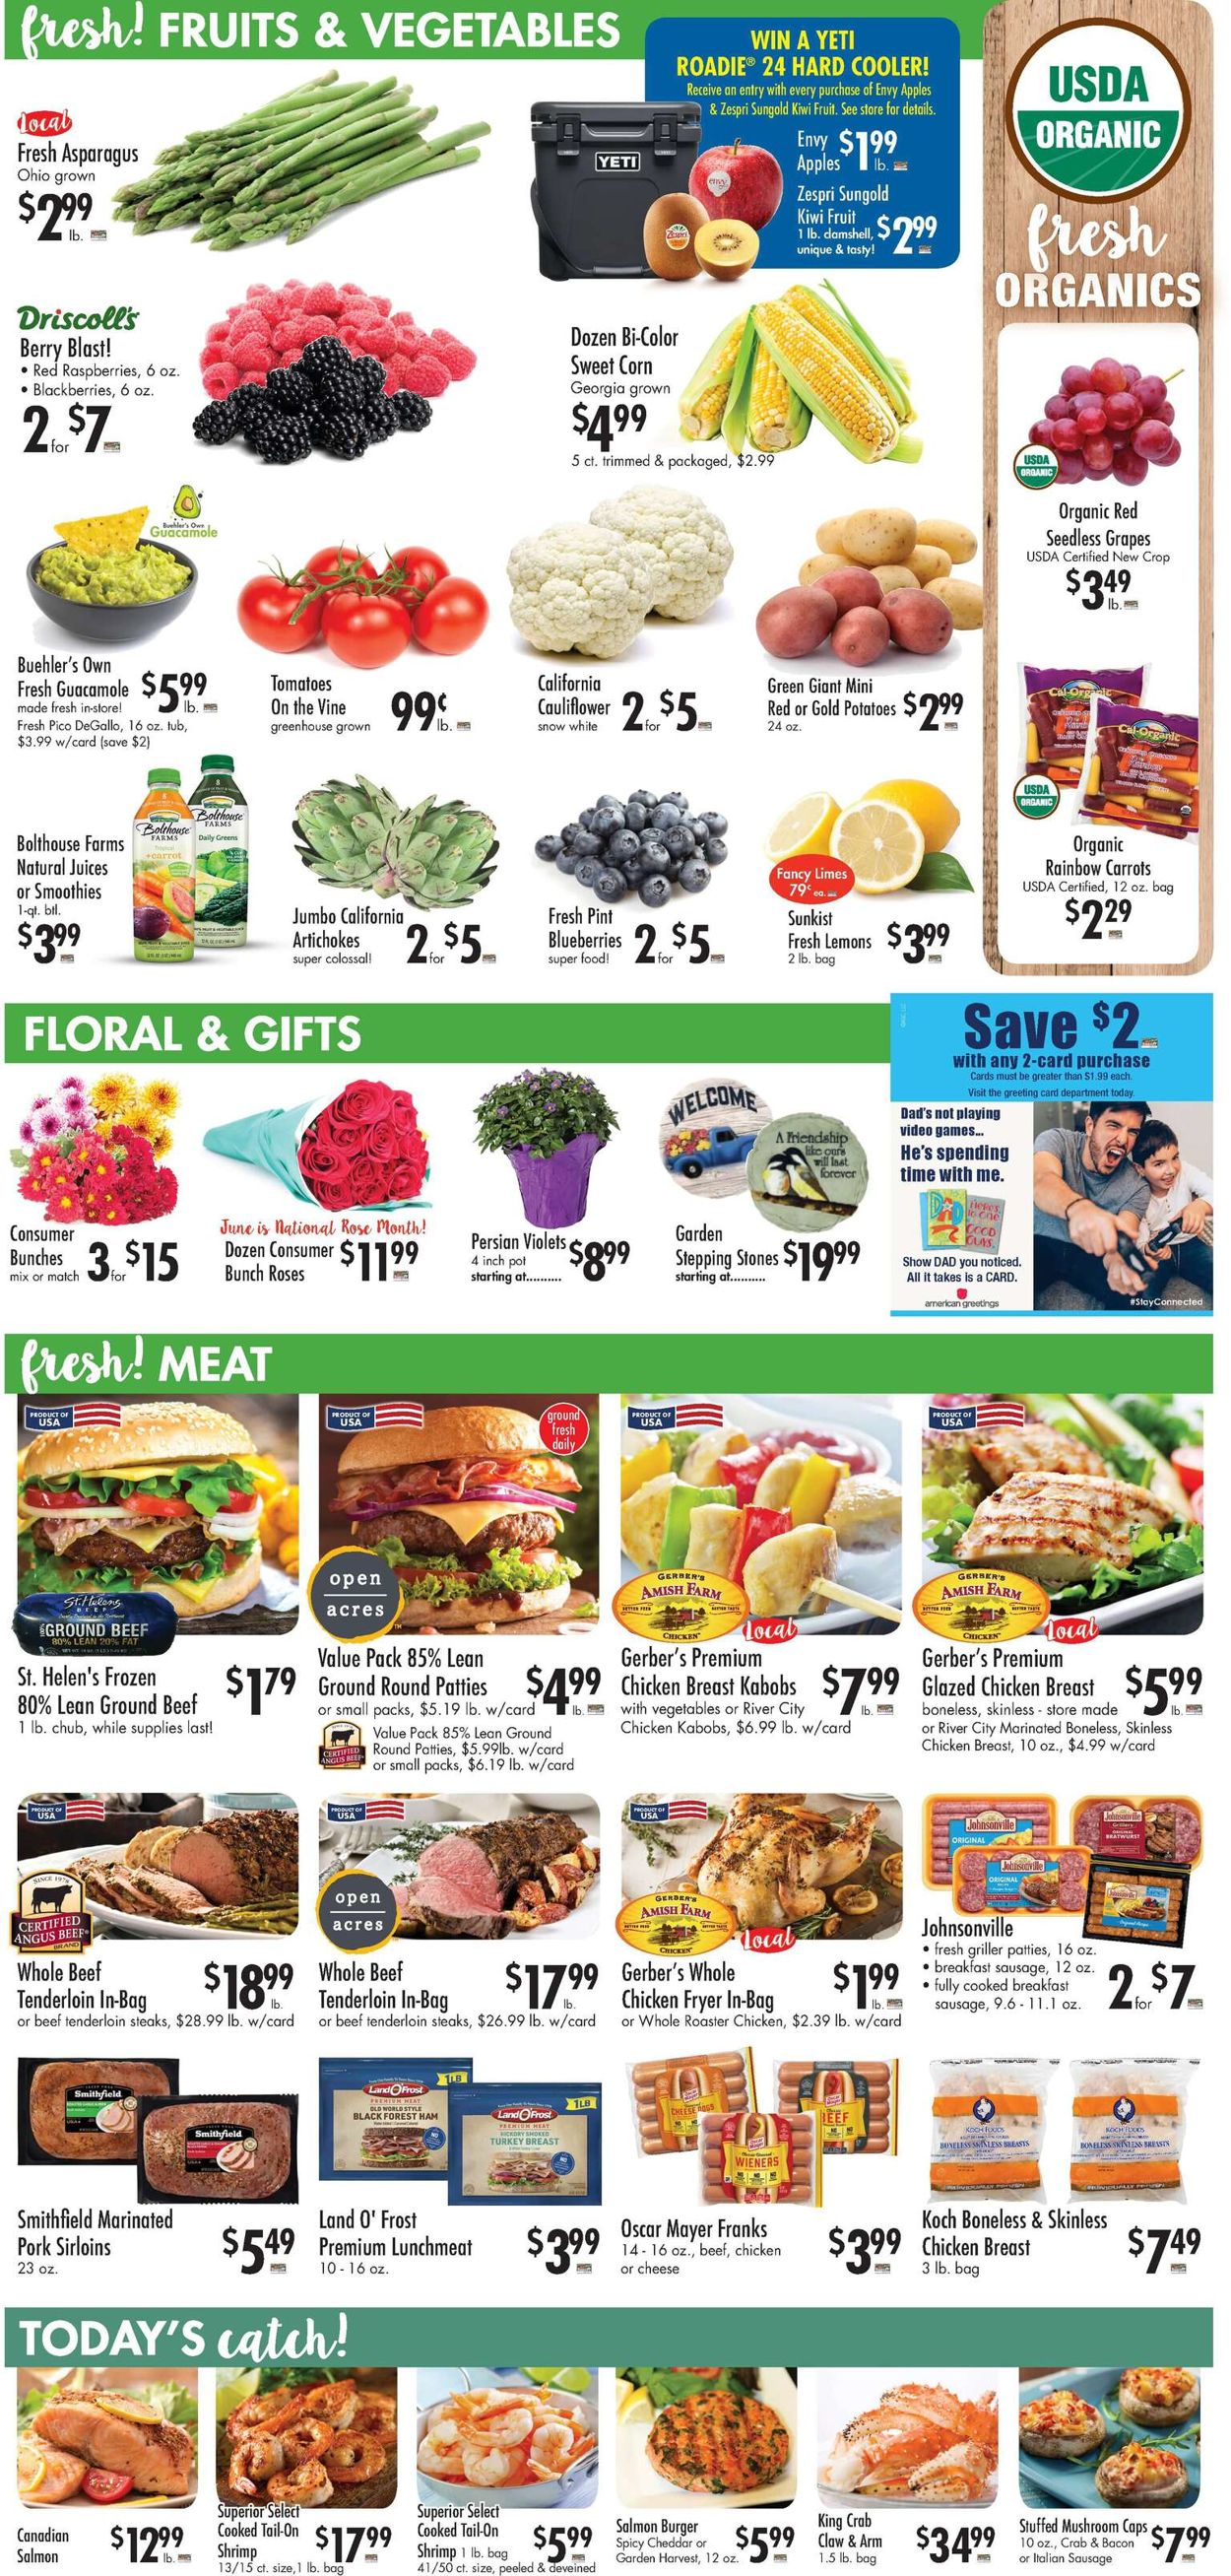 Catalogue Buehler's Fresh Foods from 06/09/2021